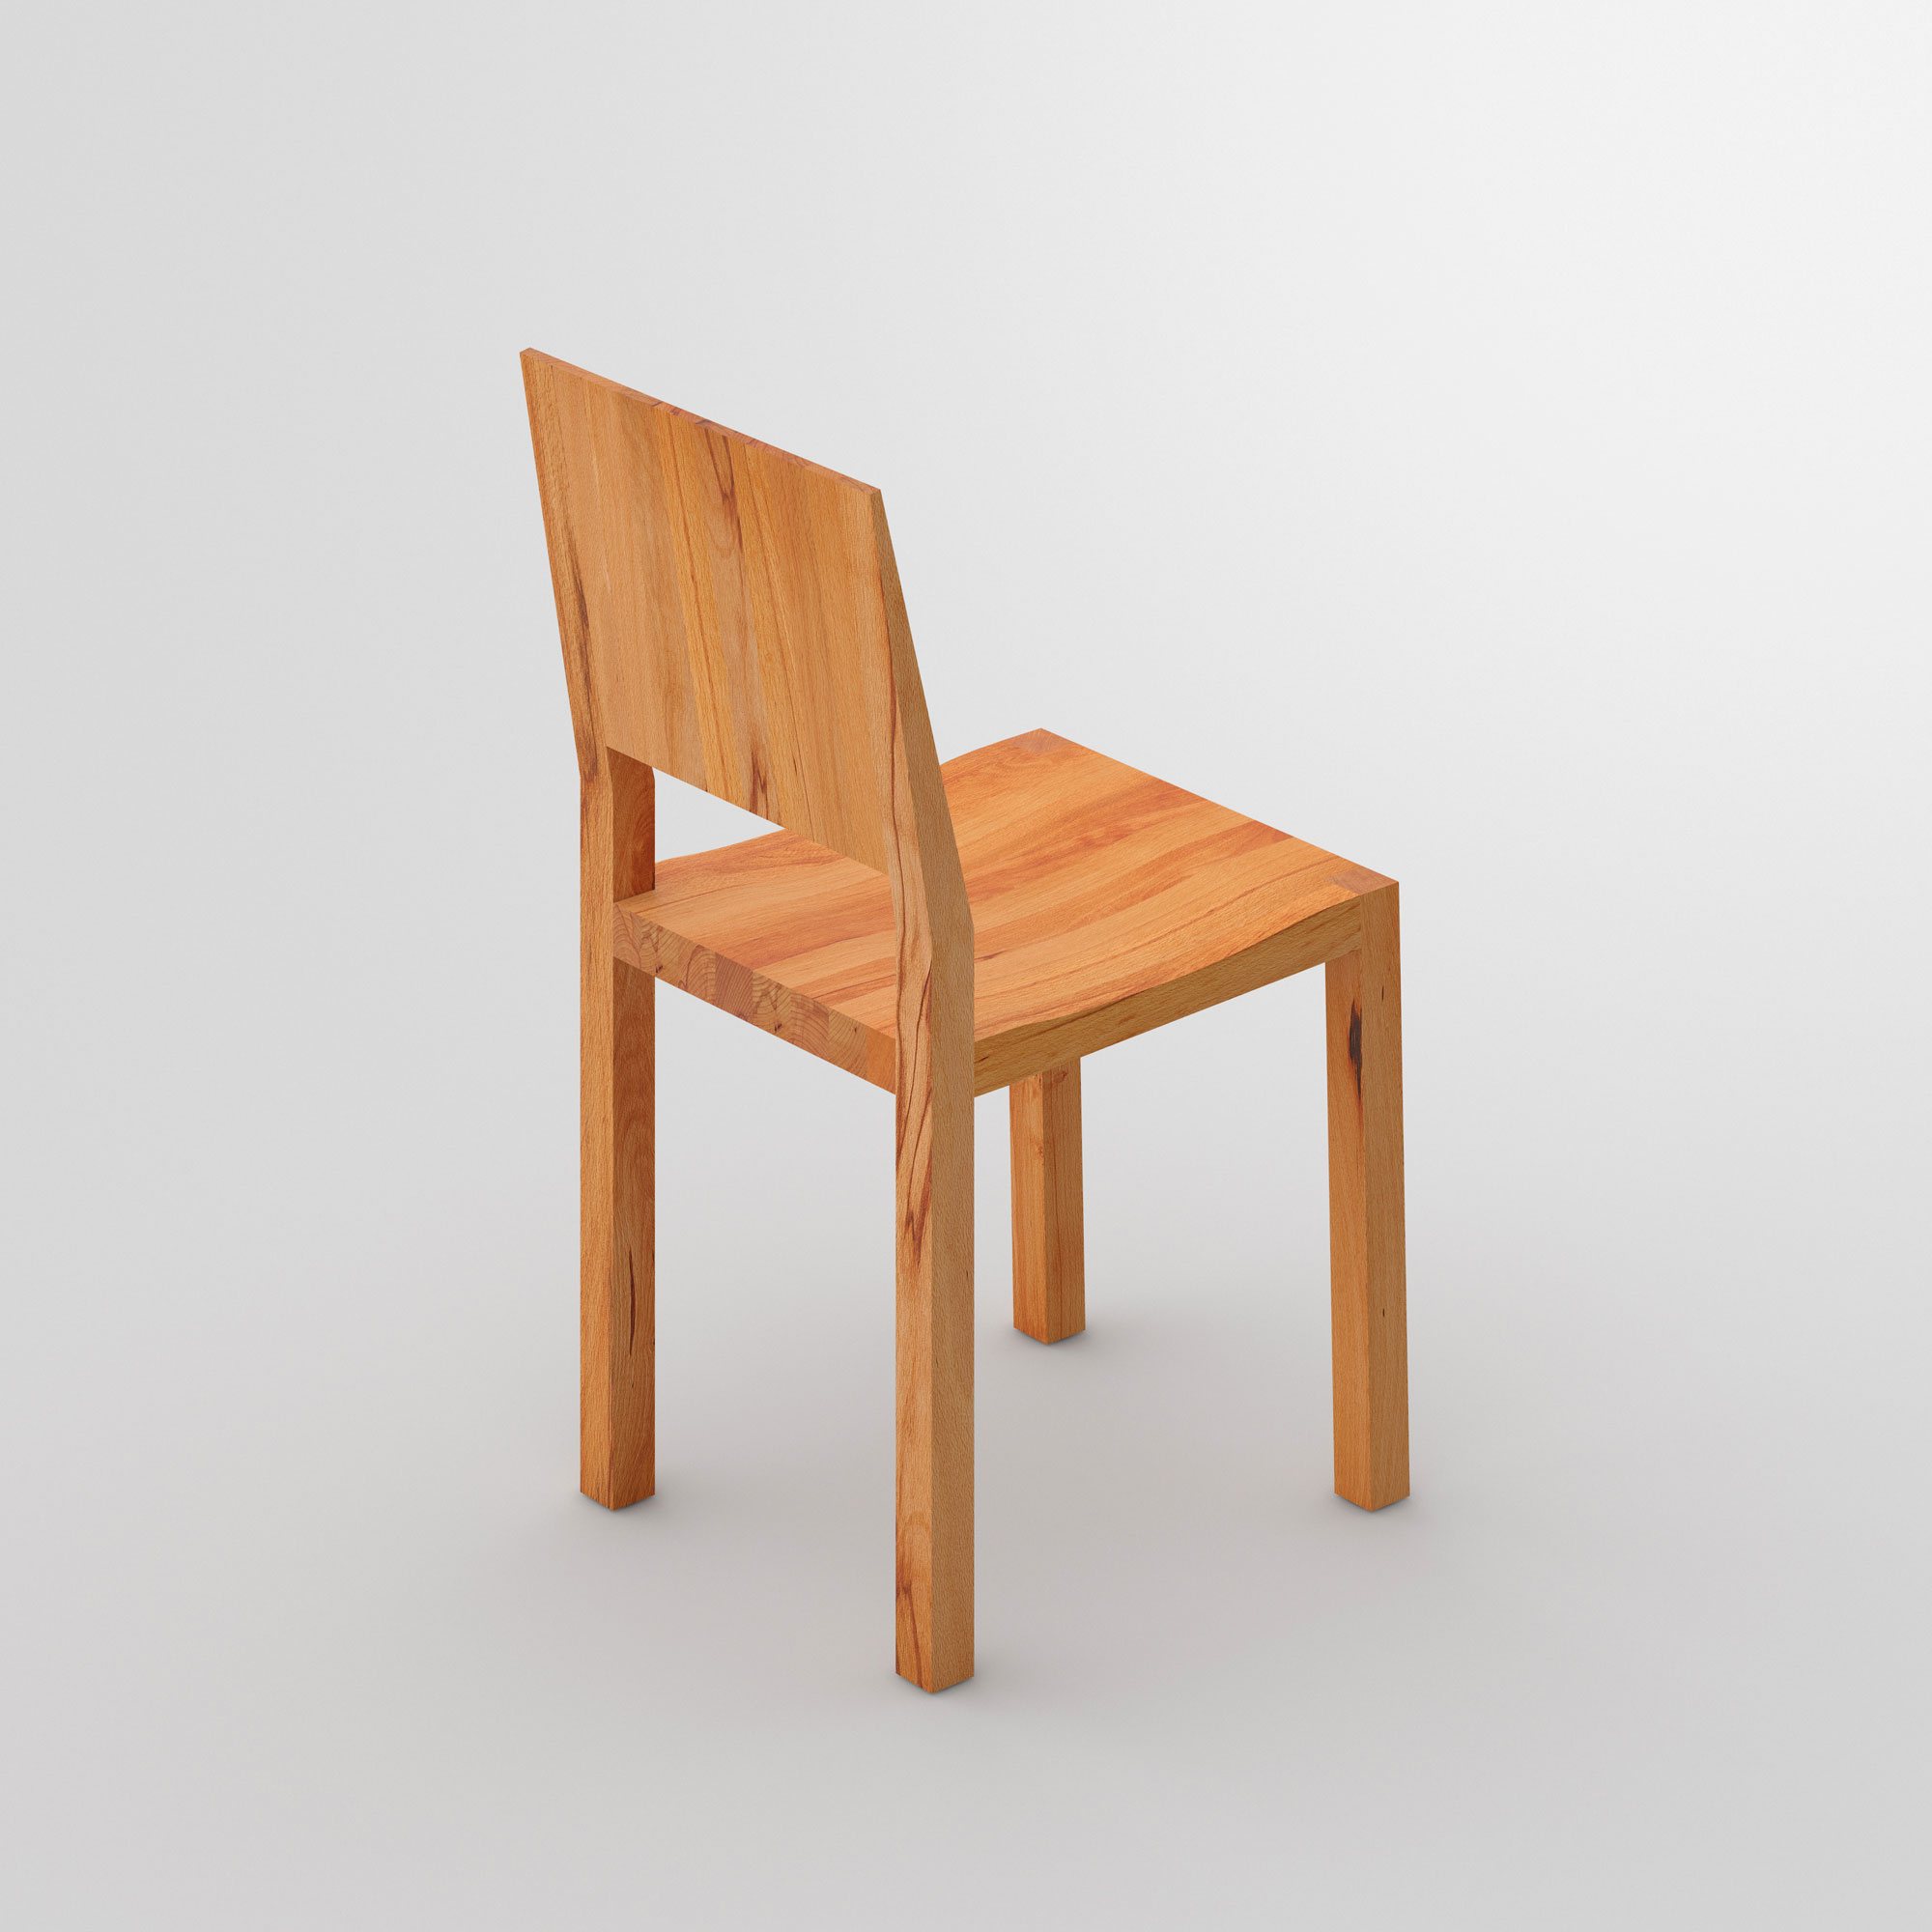 Solid Wood Chair TAU cam3 custom made in solid wood by vitamin design